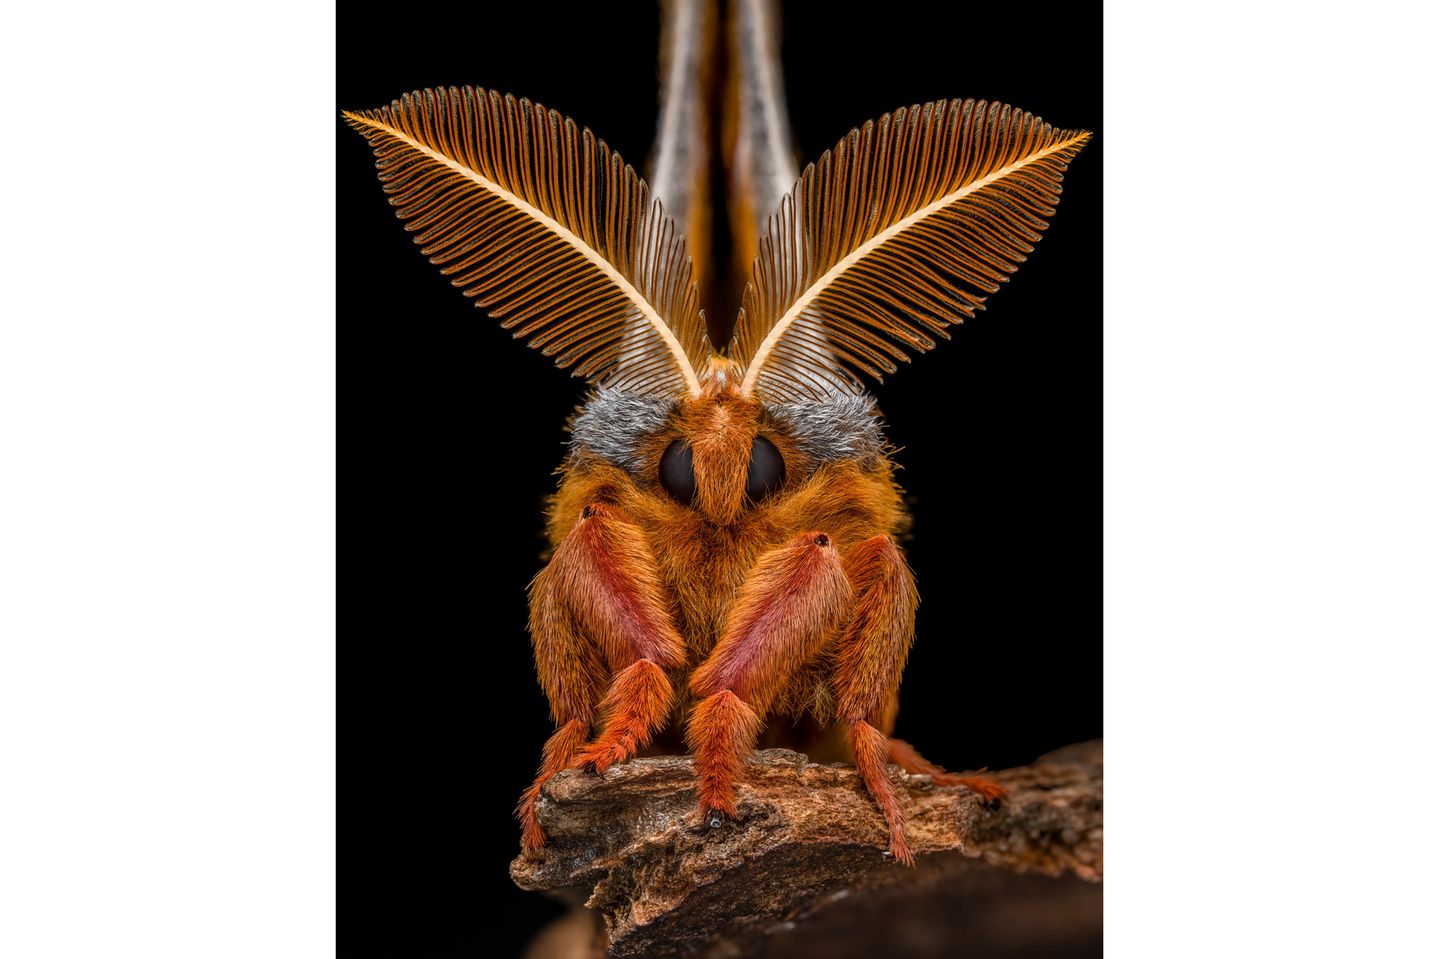 Invert-Portrait-Finalist-Benjamin_Salb-Polyphemus-Moth-CUPOTY  Name: Benjamin Salb Picture title: Portrait of a Polyphemus Moth Category: Invertebrate Portrait (Finalist) Nationality: American Occupation: IT Security Manager      Benjamin: ‘This image is a 12 shot handheld stack of a male Polyphemus moth. I photographed it in the fall of 2021 after it emerged from a cocoon I was in possession of over the summer. Several hours after emerging, it was moved into a large mesh tent where I was able to safely attempt some photographs. After some time passed, I placed a piece of broken bark in front of him and he slowly worked his way on to it and posed in the manner seen in the image. He was released the same evening in the hopes of finding a mate.’      Technical information: Nikon Z7  Venus Laowa 100mm f/2.8 X2 Macro 1/200, f/11, ISO200 Accessories: Godox V860II flash and Cygnustech diffuser.  Post processing: 12 pictures stacked in Helicon Focus, basic adjustments in Lightroom, Topaz DeNoise.      Website: www.benssmallworld.com  Instagram: bens_small_world